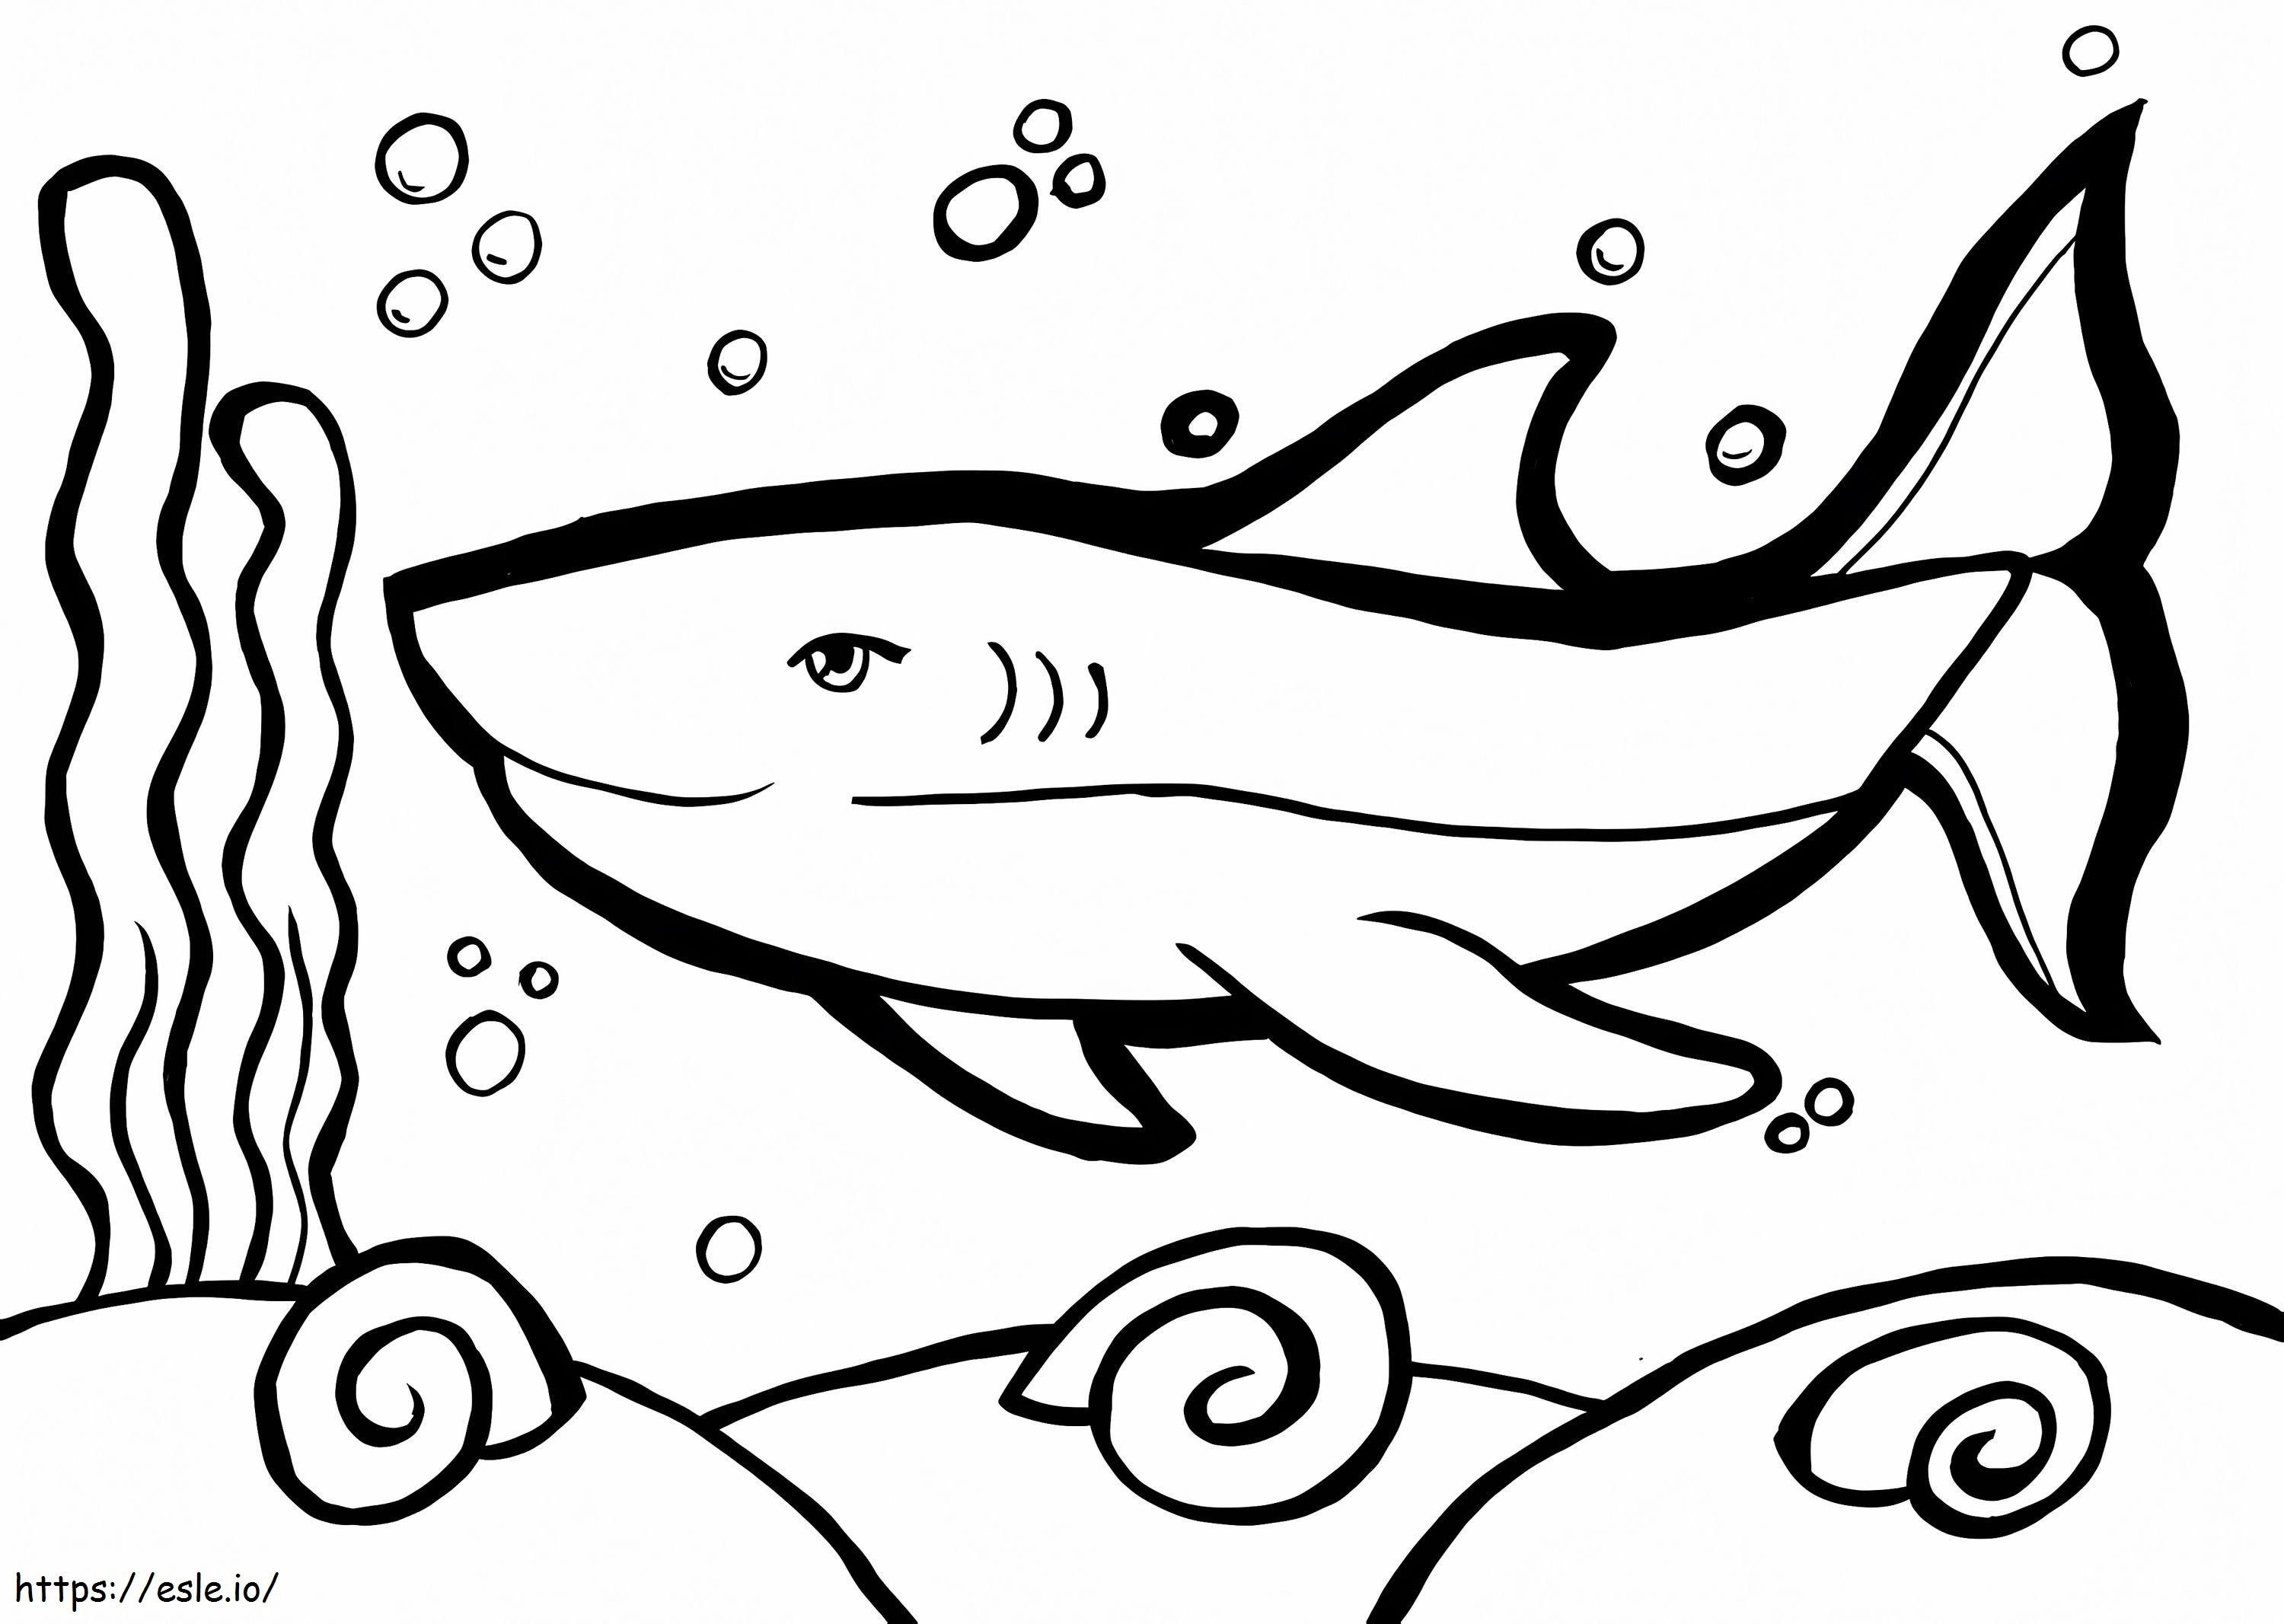 Little Shark coloring page